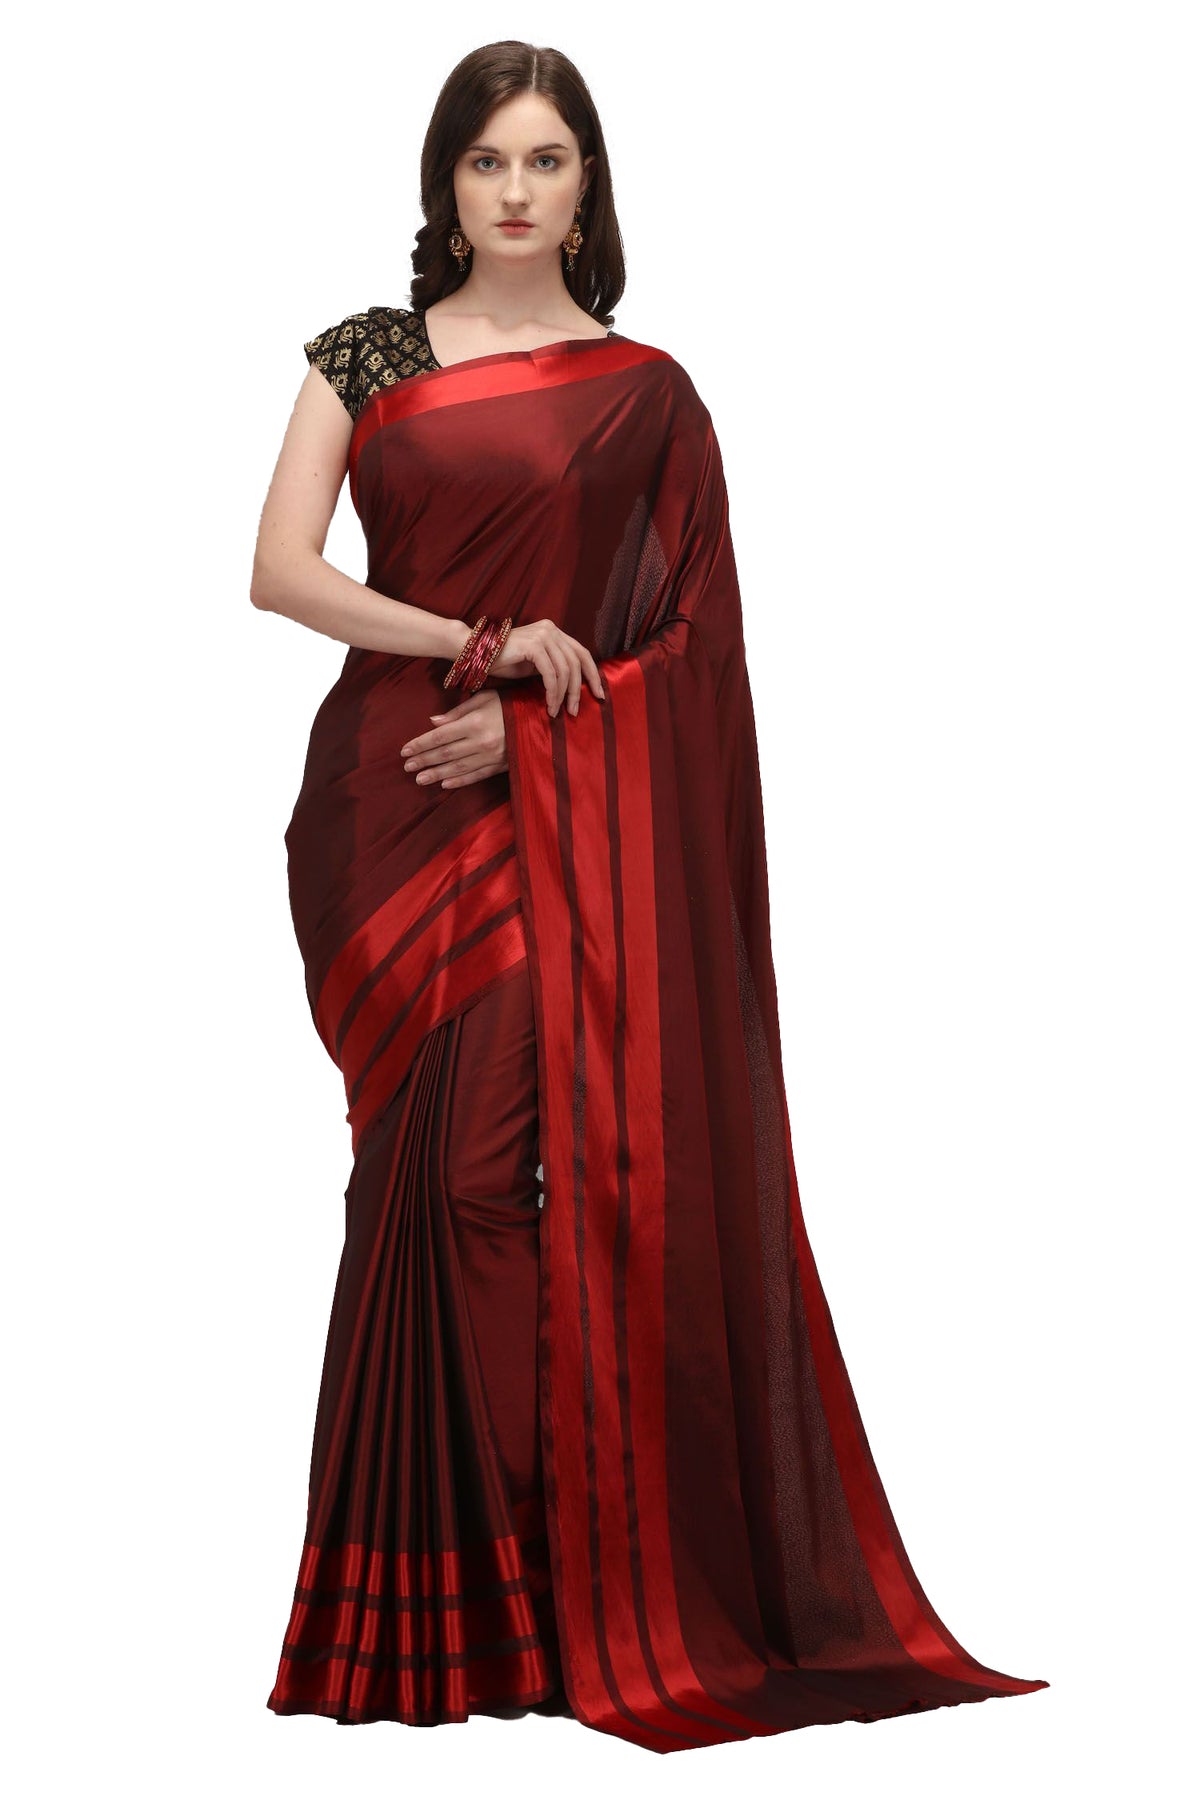 Women's Satin Silk Saree with Blouse (Red, 5-6 Mtrs) - GillKart